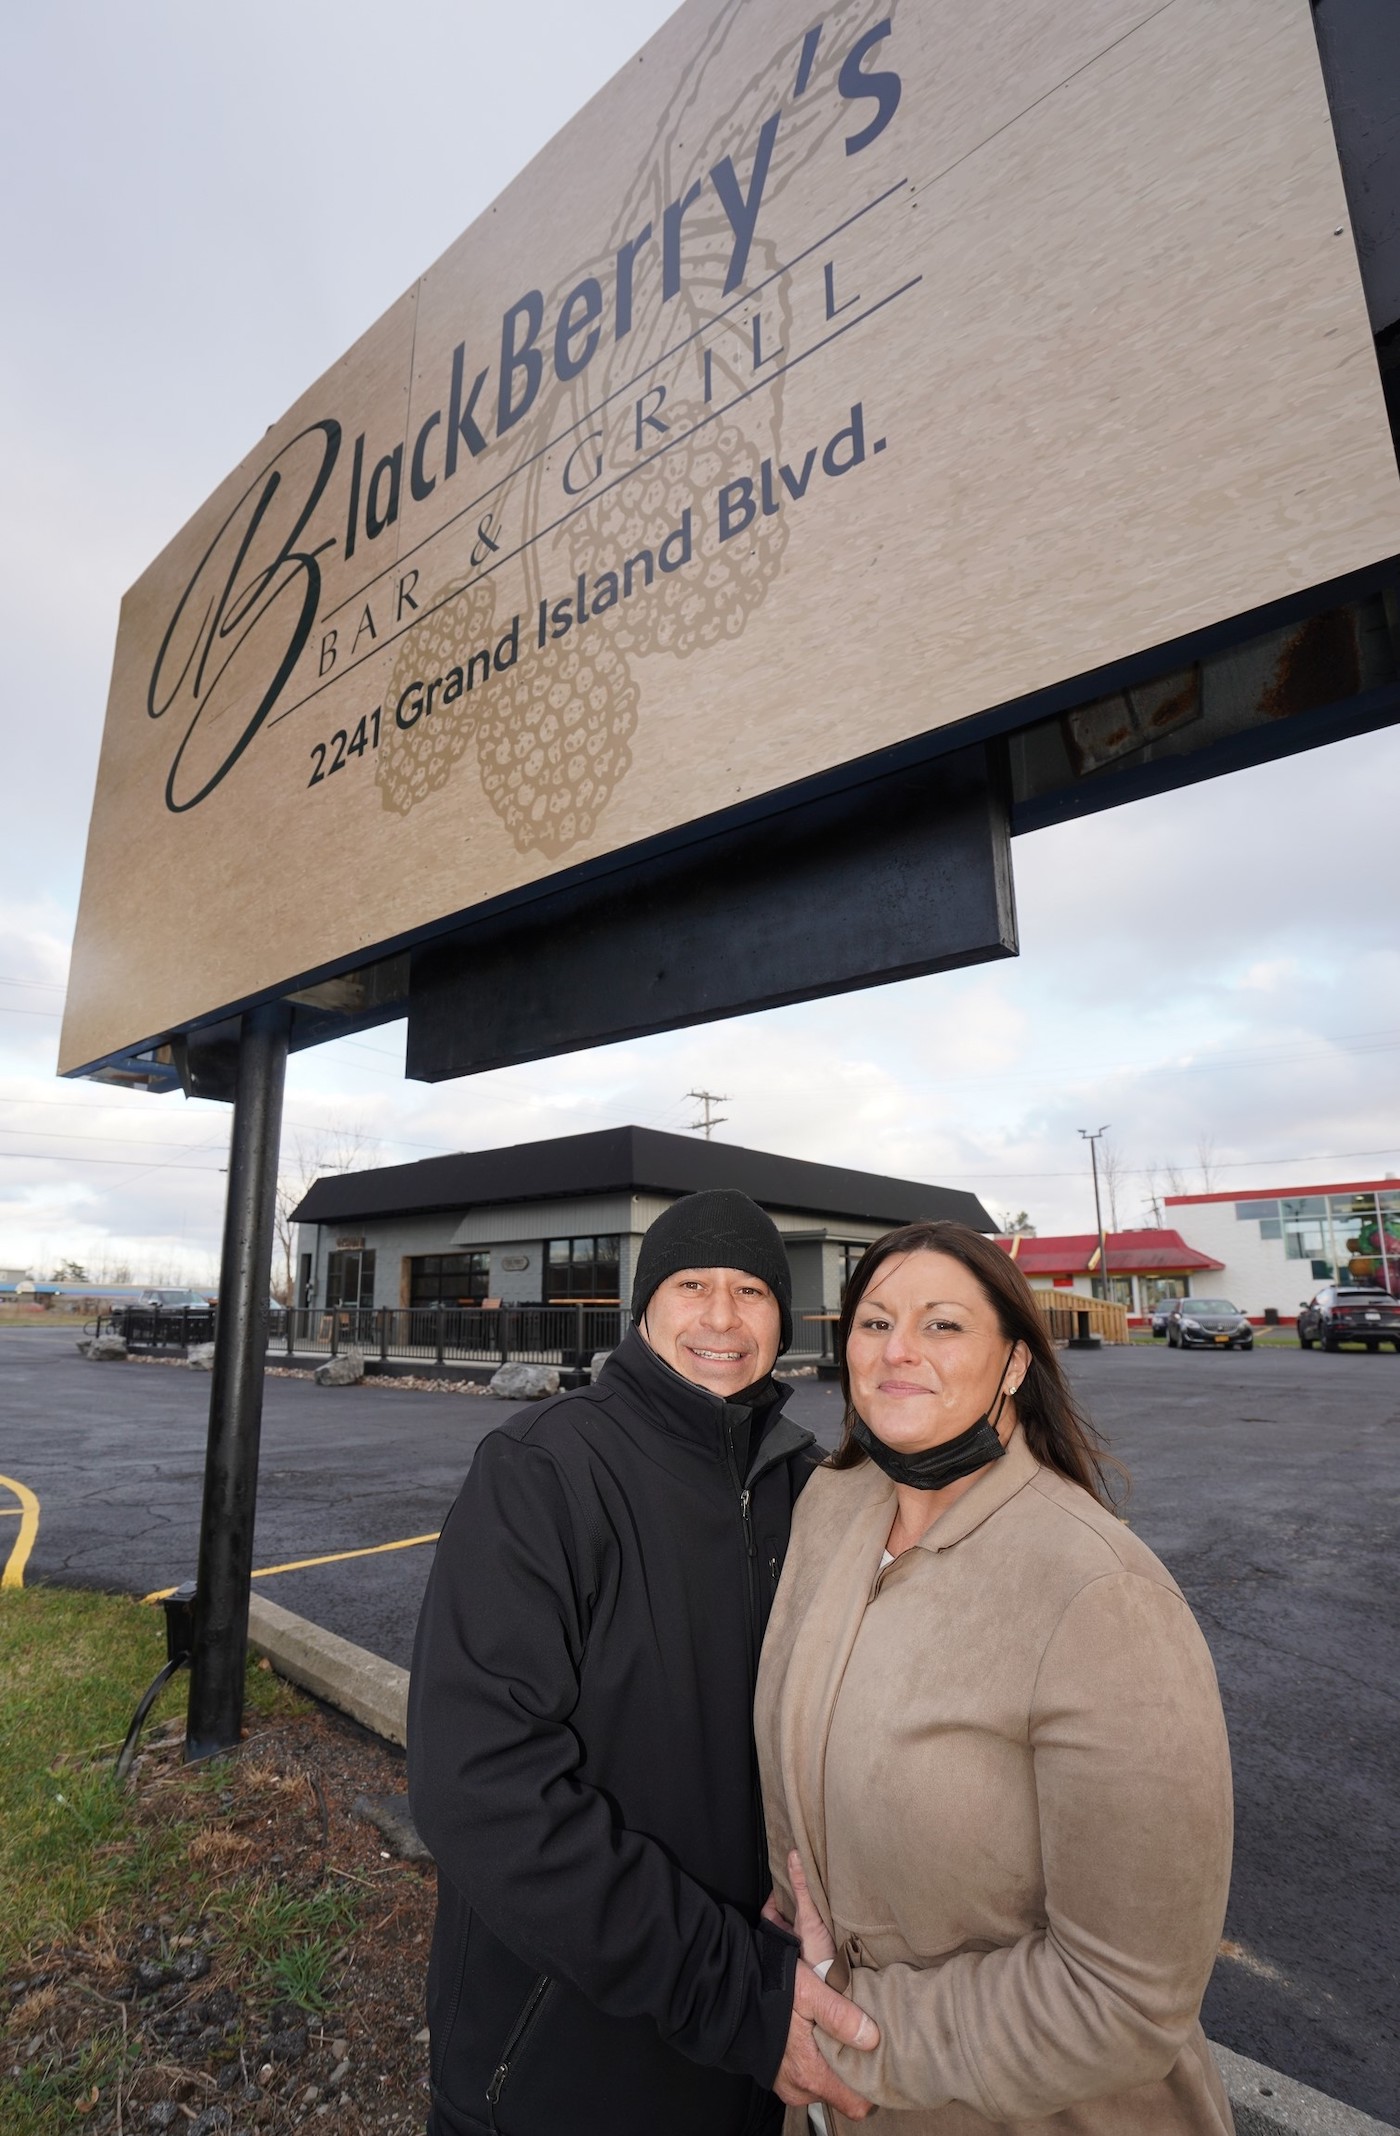 BlackBerry's owners Jason and Ann MacClellan (Photos by K&D Action Photo & Aerial Imaging)